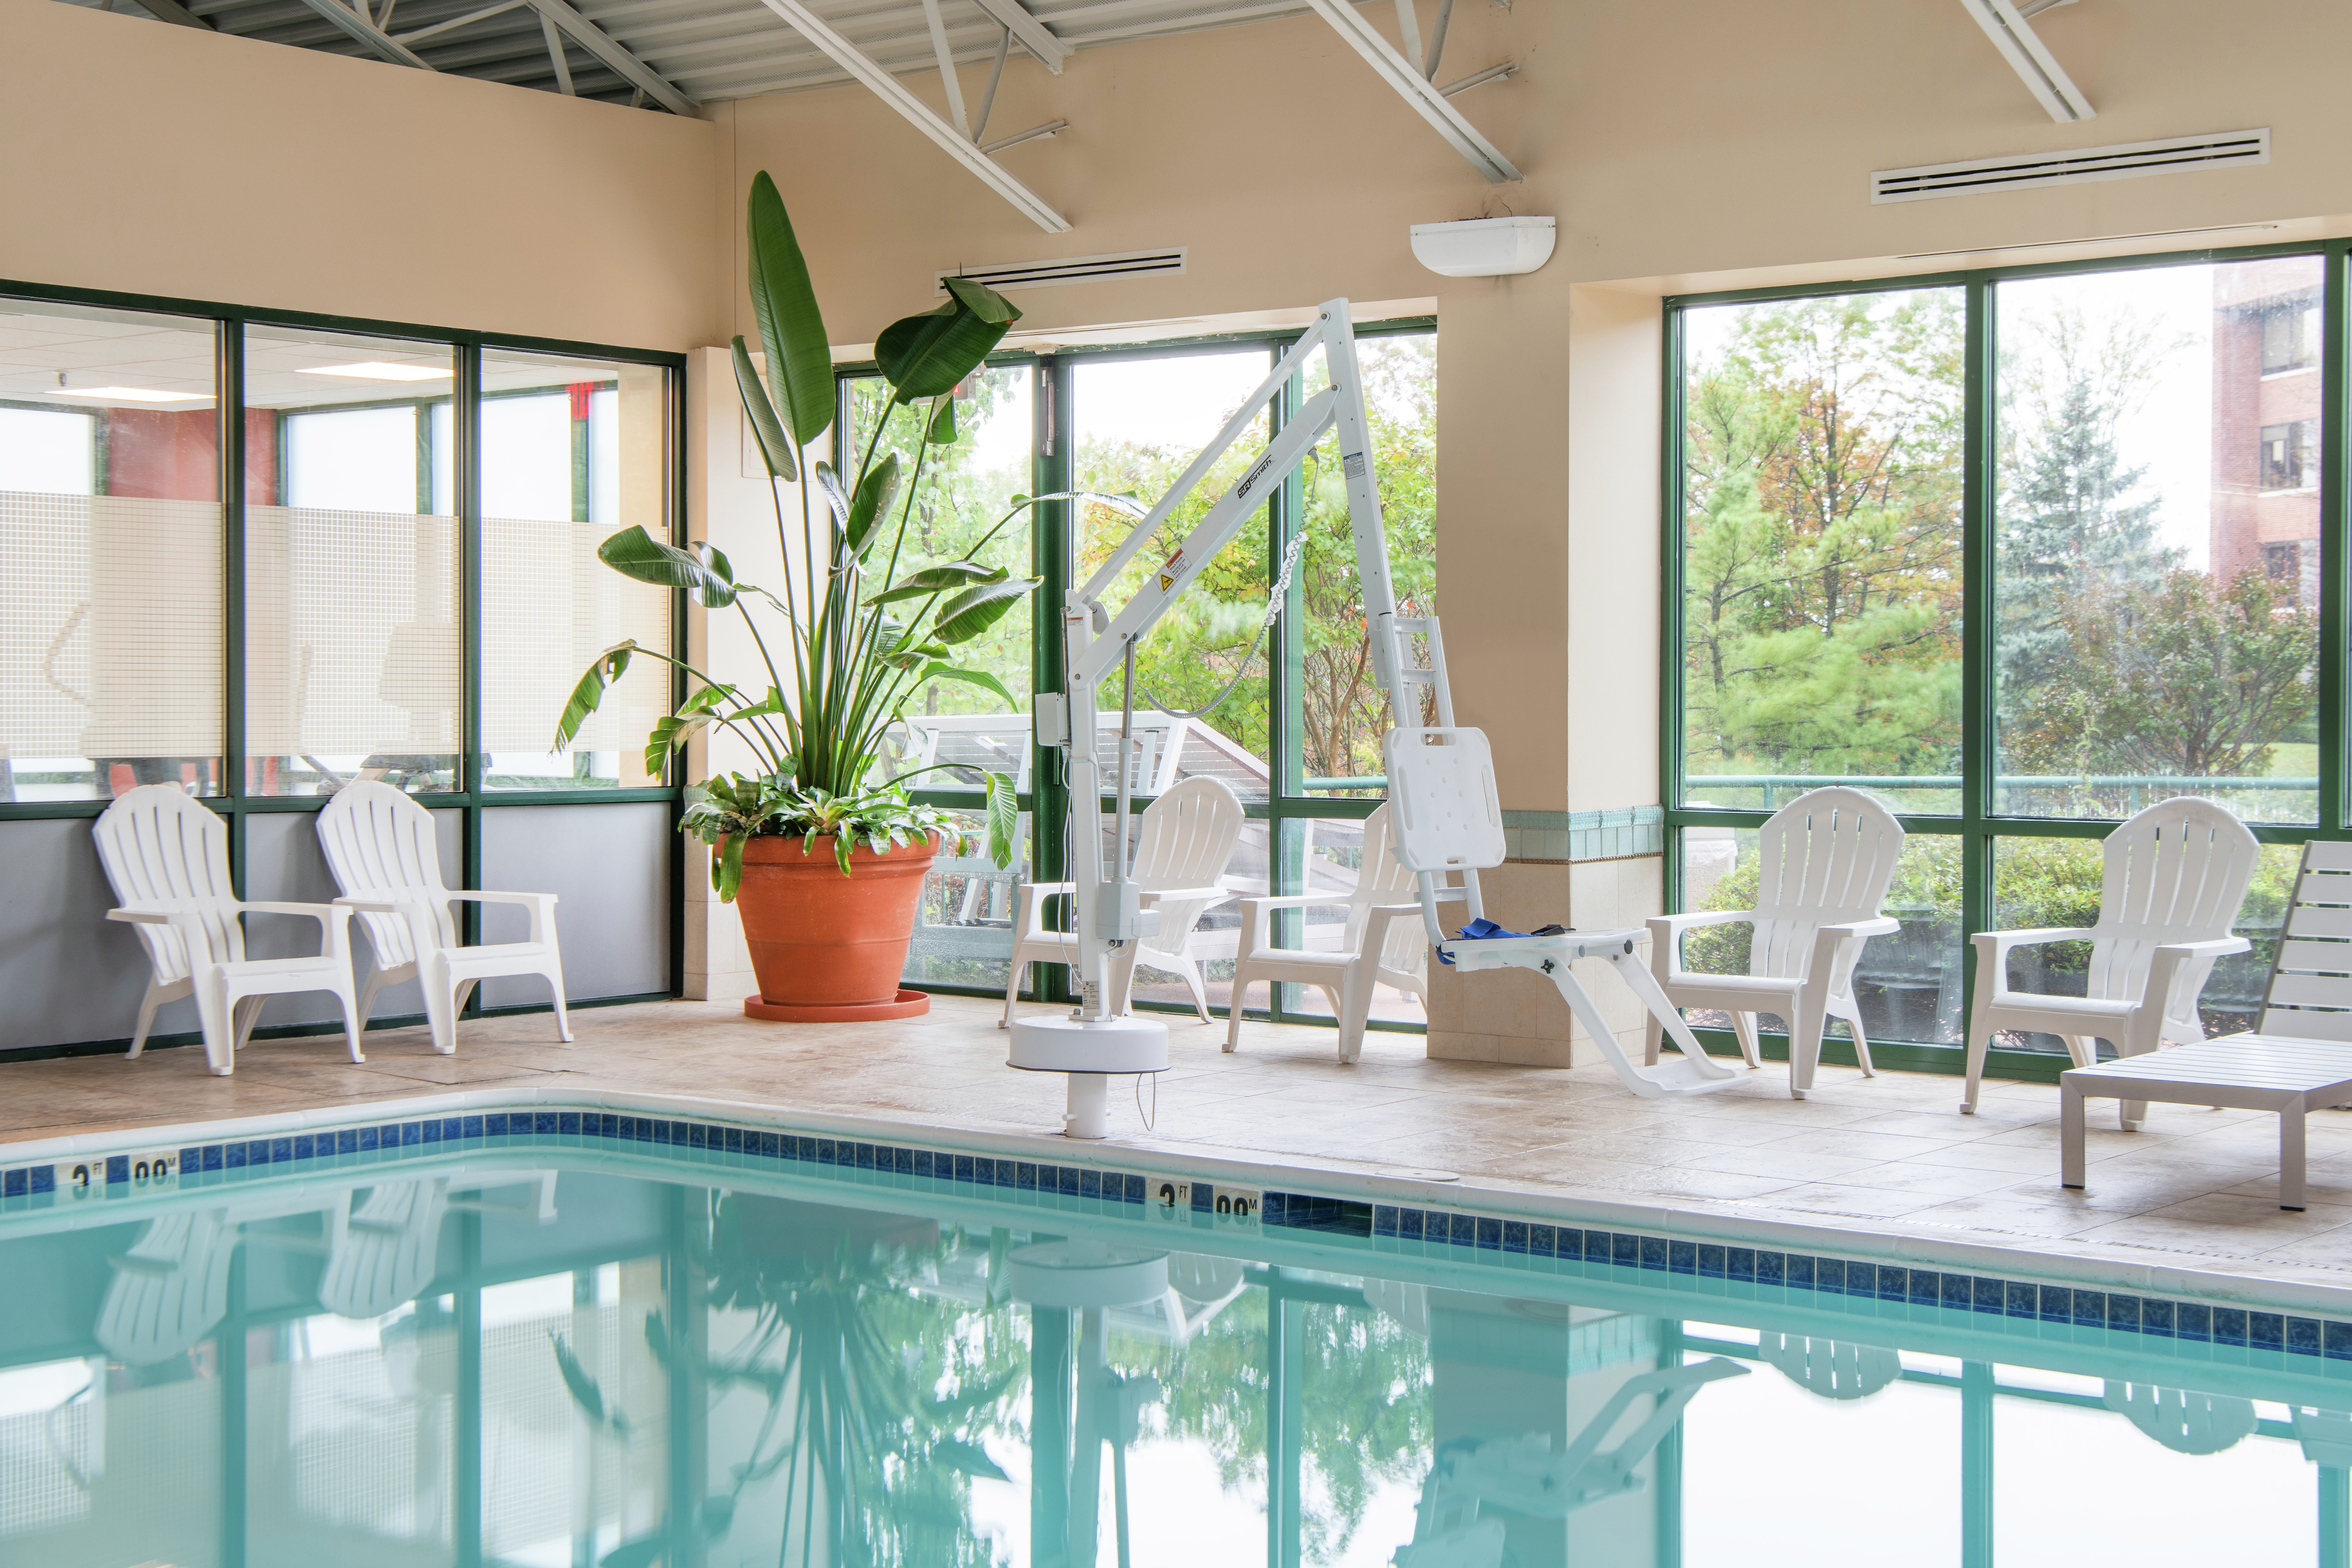 Our indoor swimming pool is open year round with a pool lift.